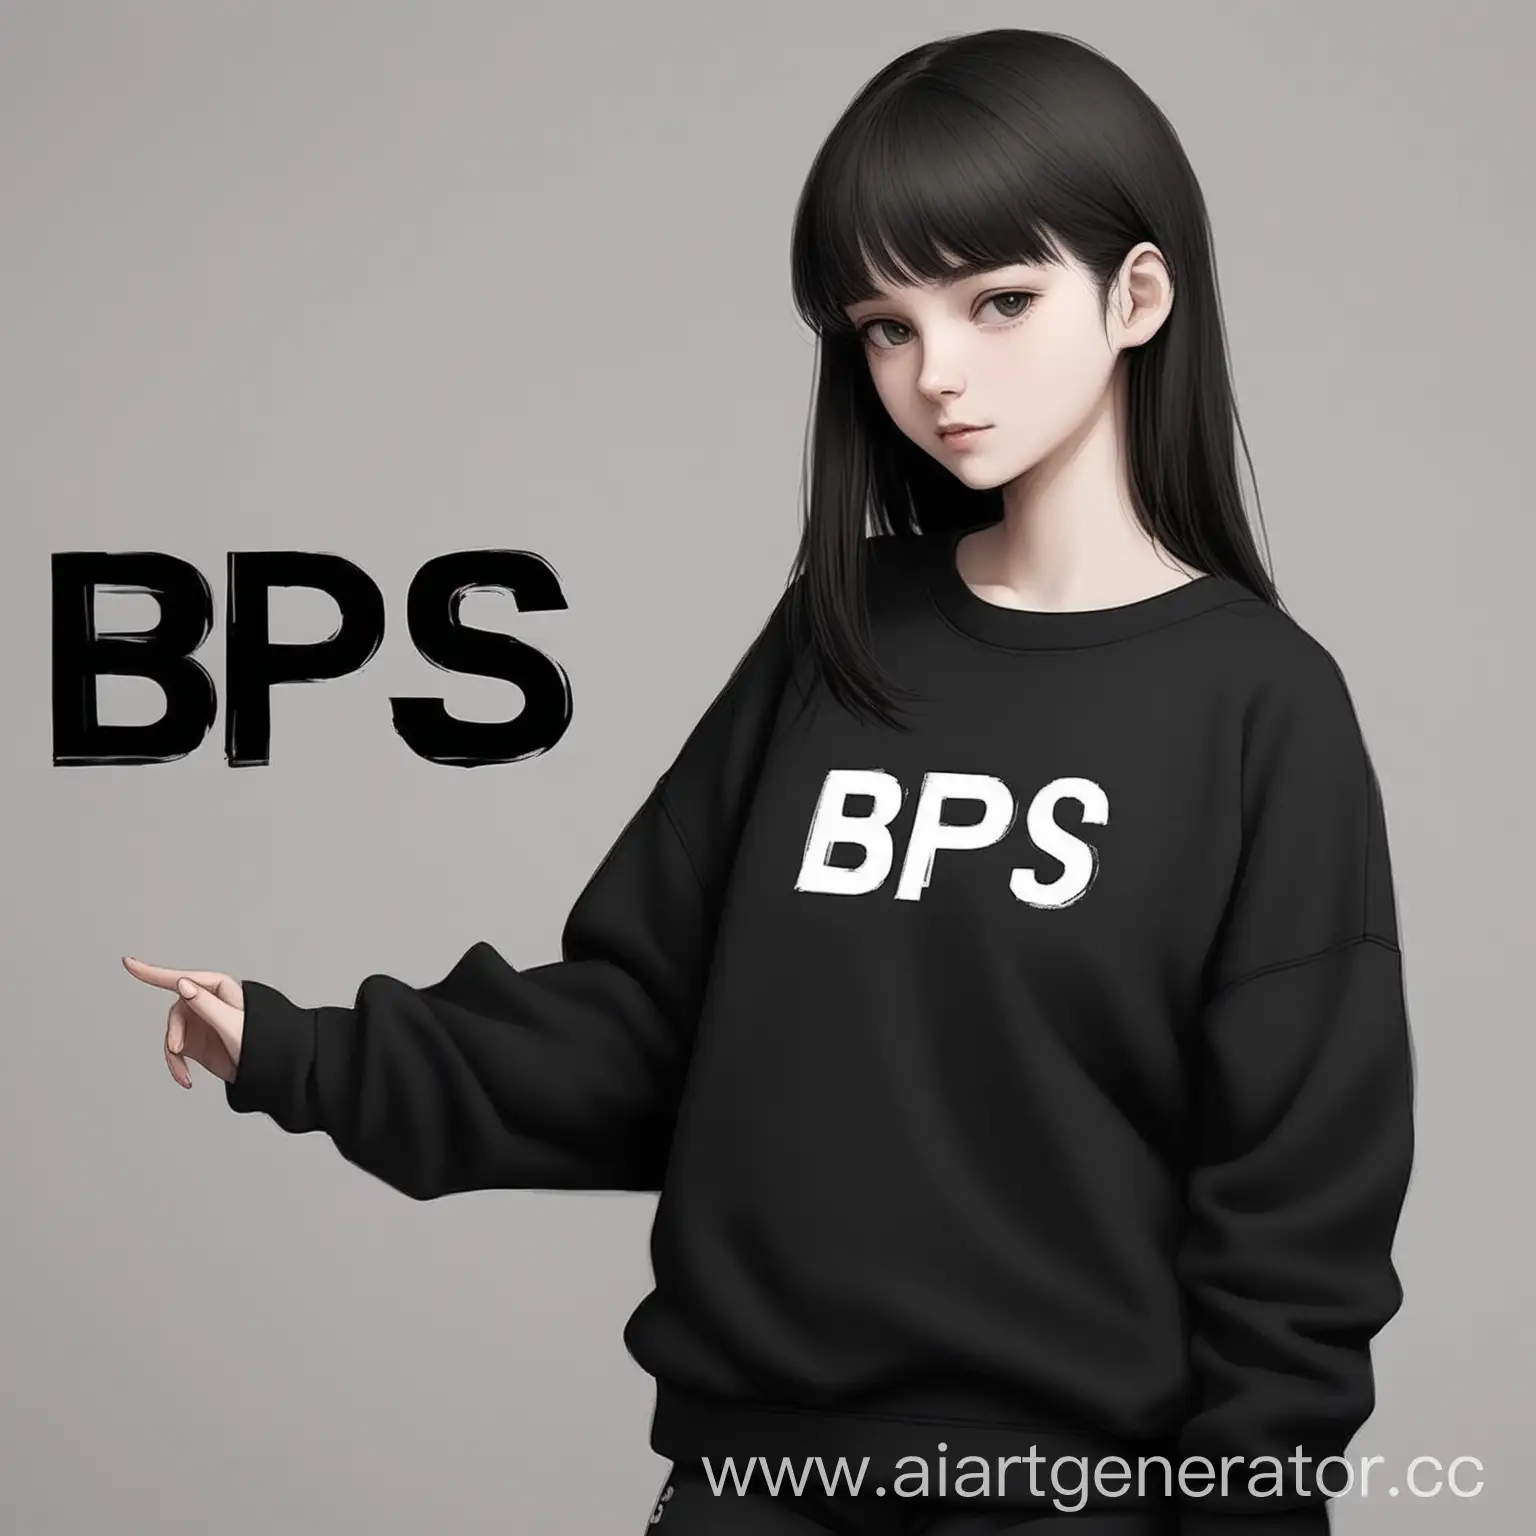 The girl who is wearing a black sweatshirt with the inscription "BPS" on the side
It's all anime style 